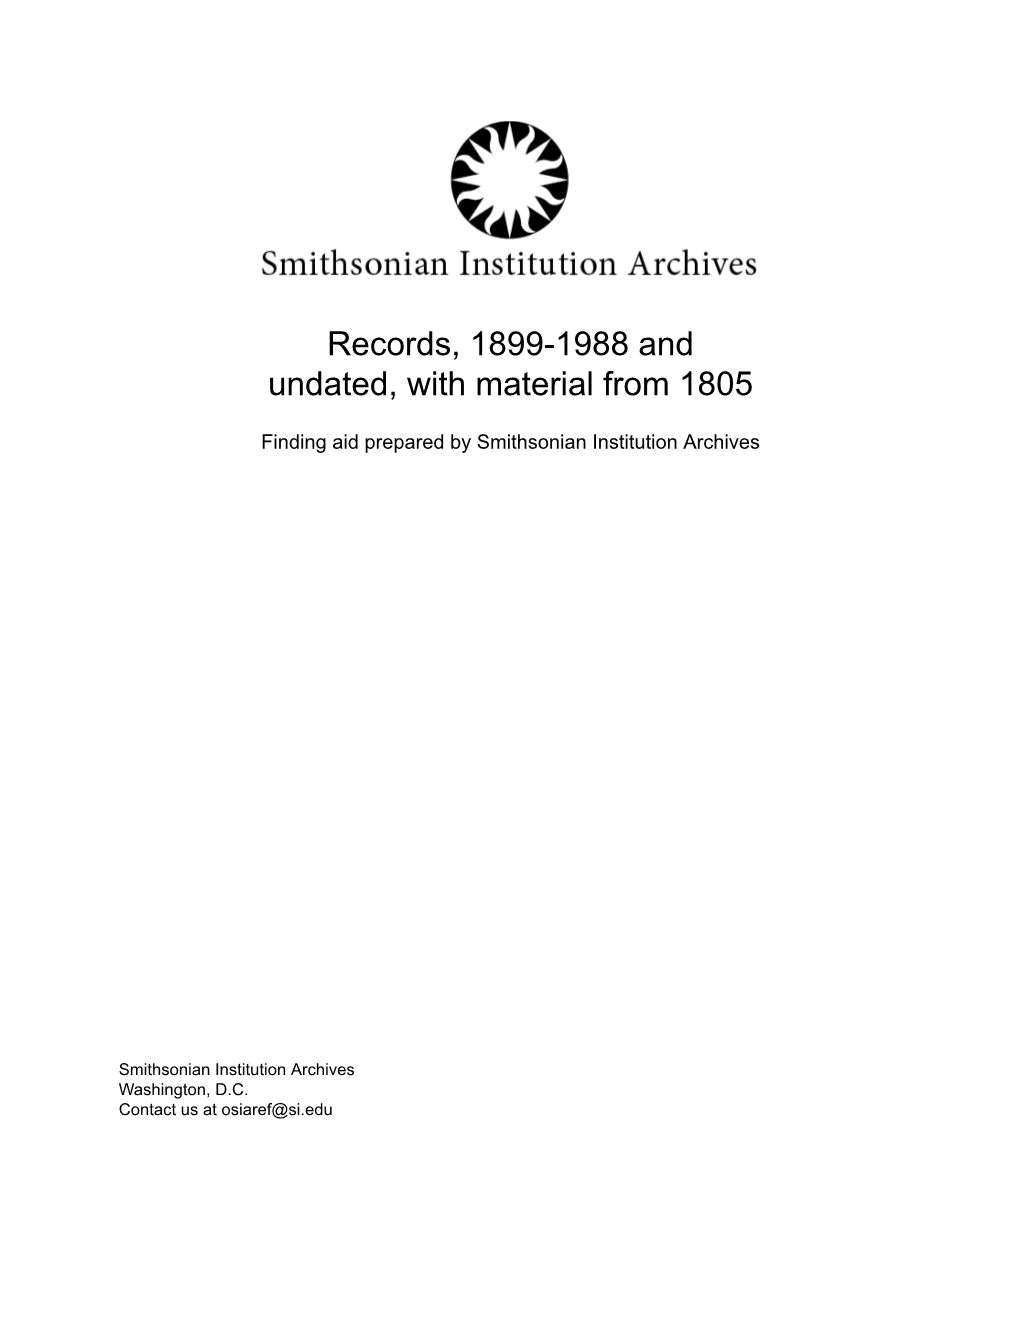 Records, 1899-1988 and Undated, with Material from 1805